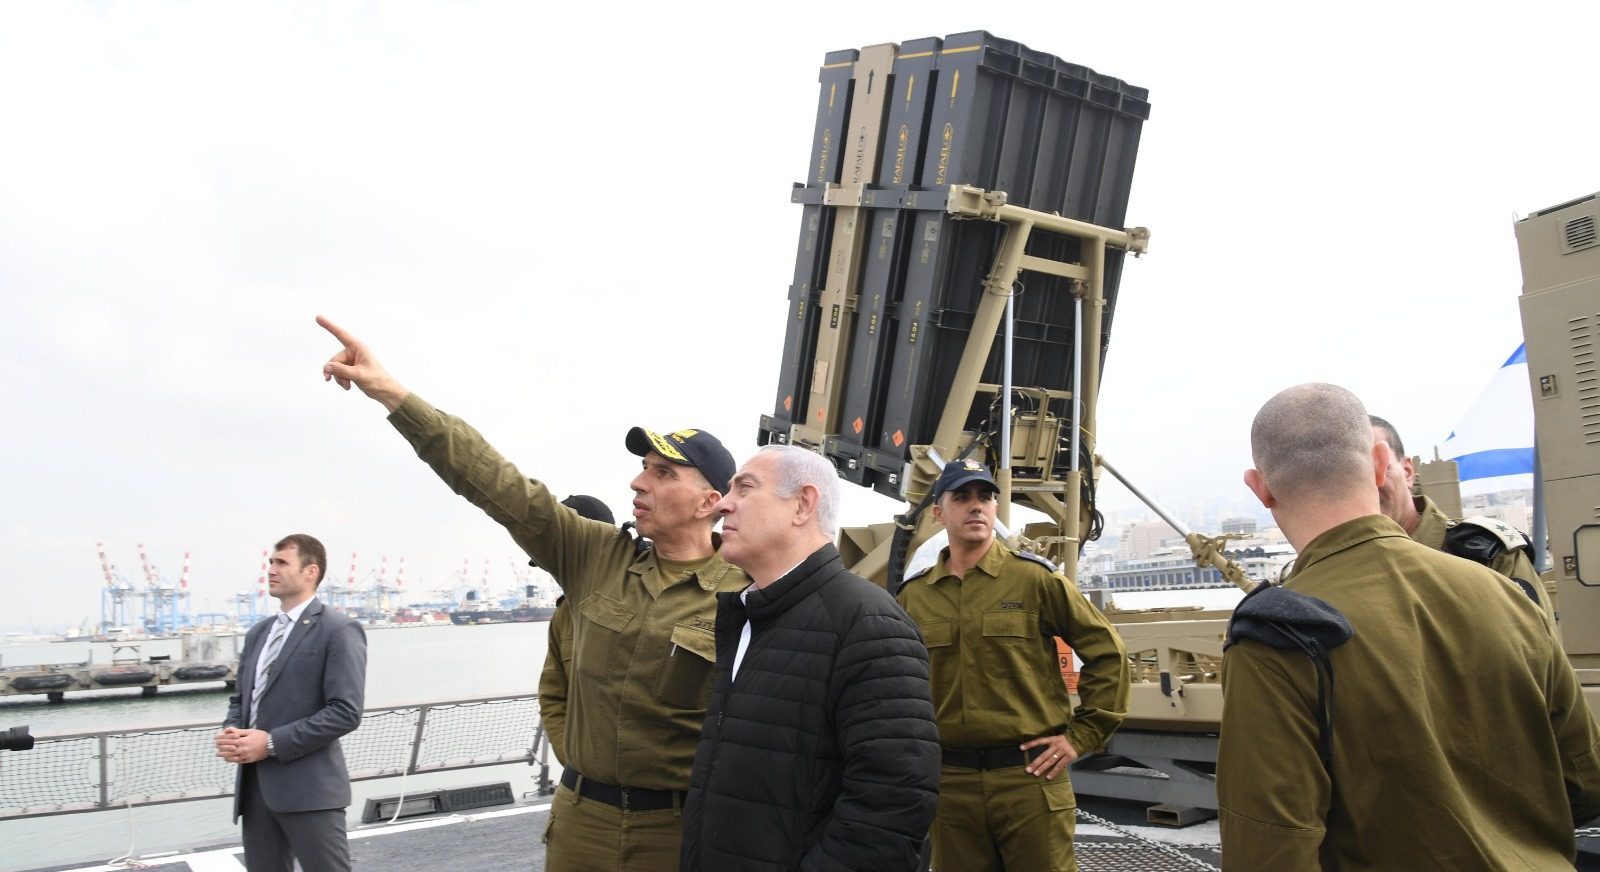 Netanyahu: Israel’s Missiles ‘Can Go Very Far, Against Any Enemy’